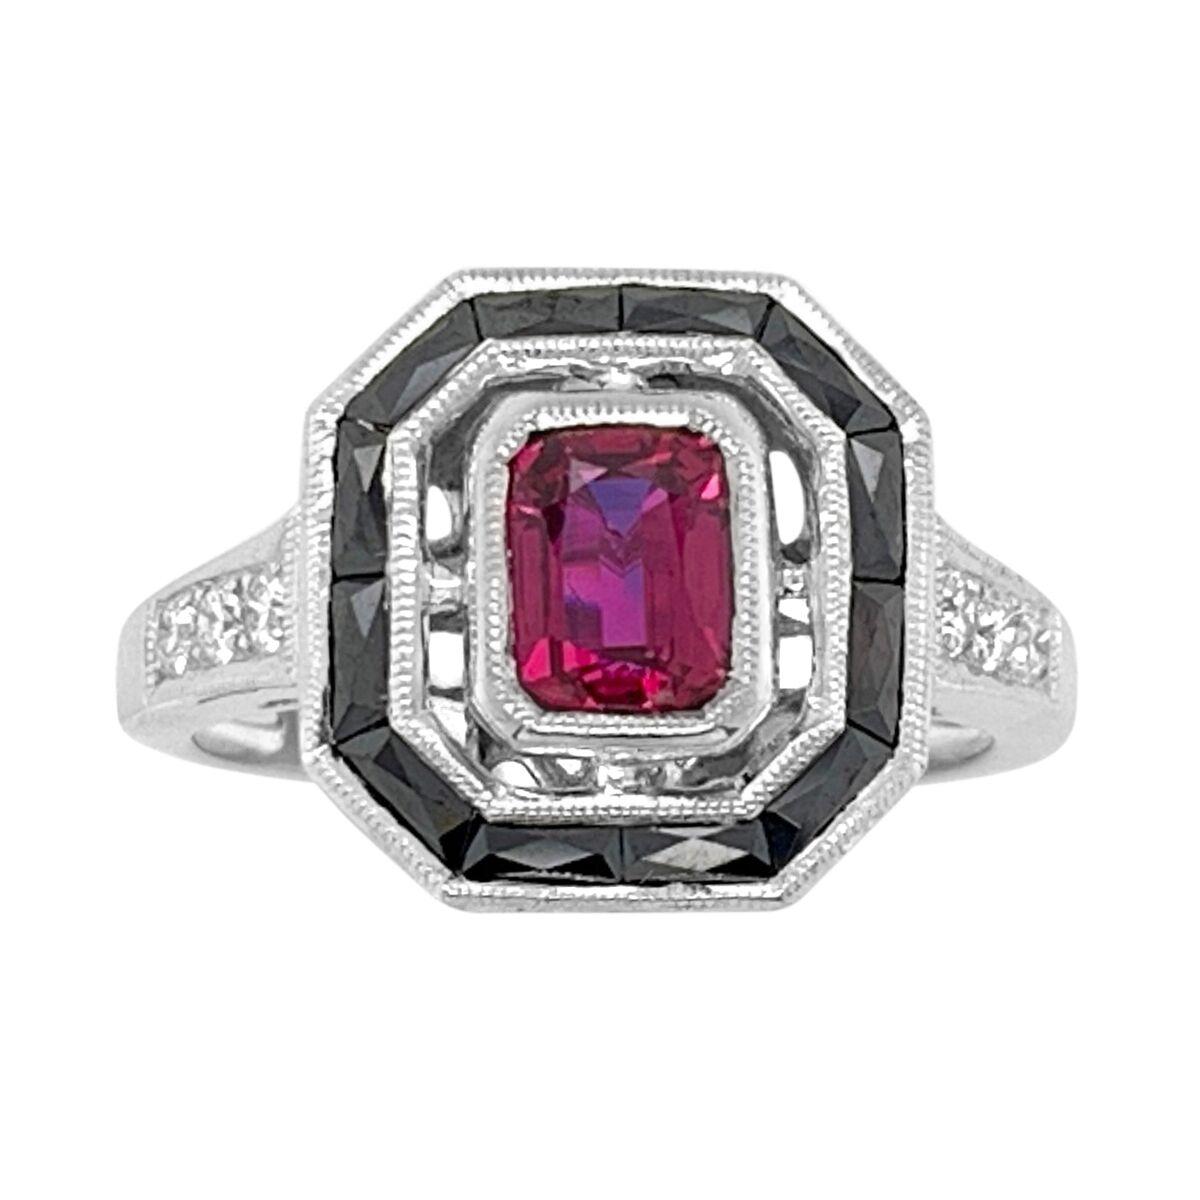 Art Deco at its best, using French calibre cut Precious Gemstones.

New World Technology meets Old World Styles!

Material: 18k White Gold
Hallmark: 18K JH
Ring Size: 6.5
Metal Finish: High Polish
Gemstone: Ruby, Onyx and Diamond
Ruby Weight: 0.90